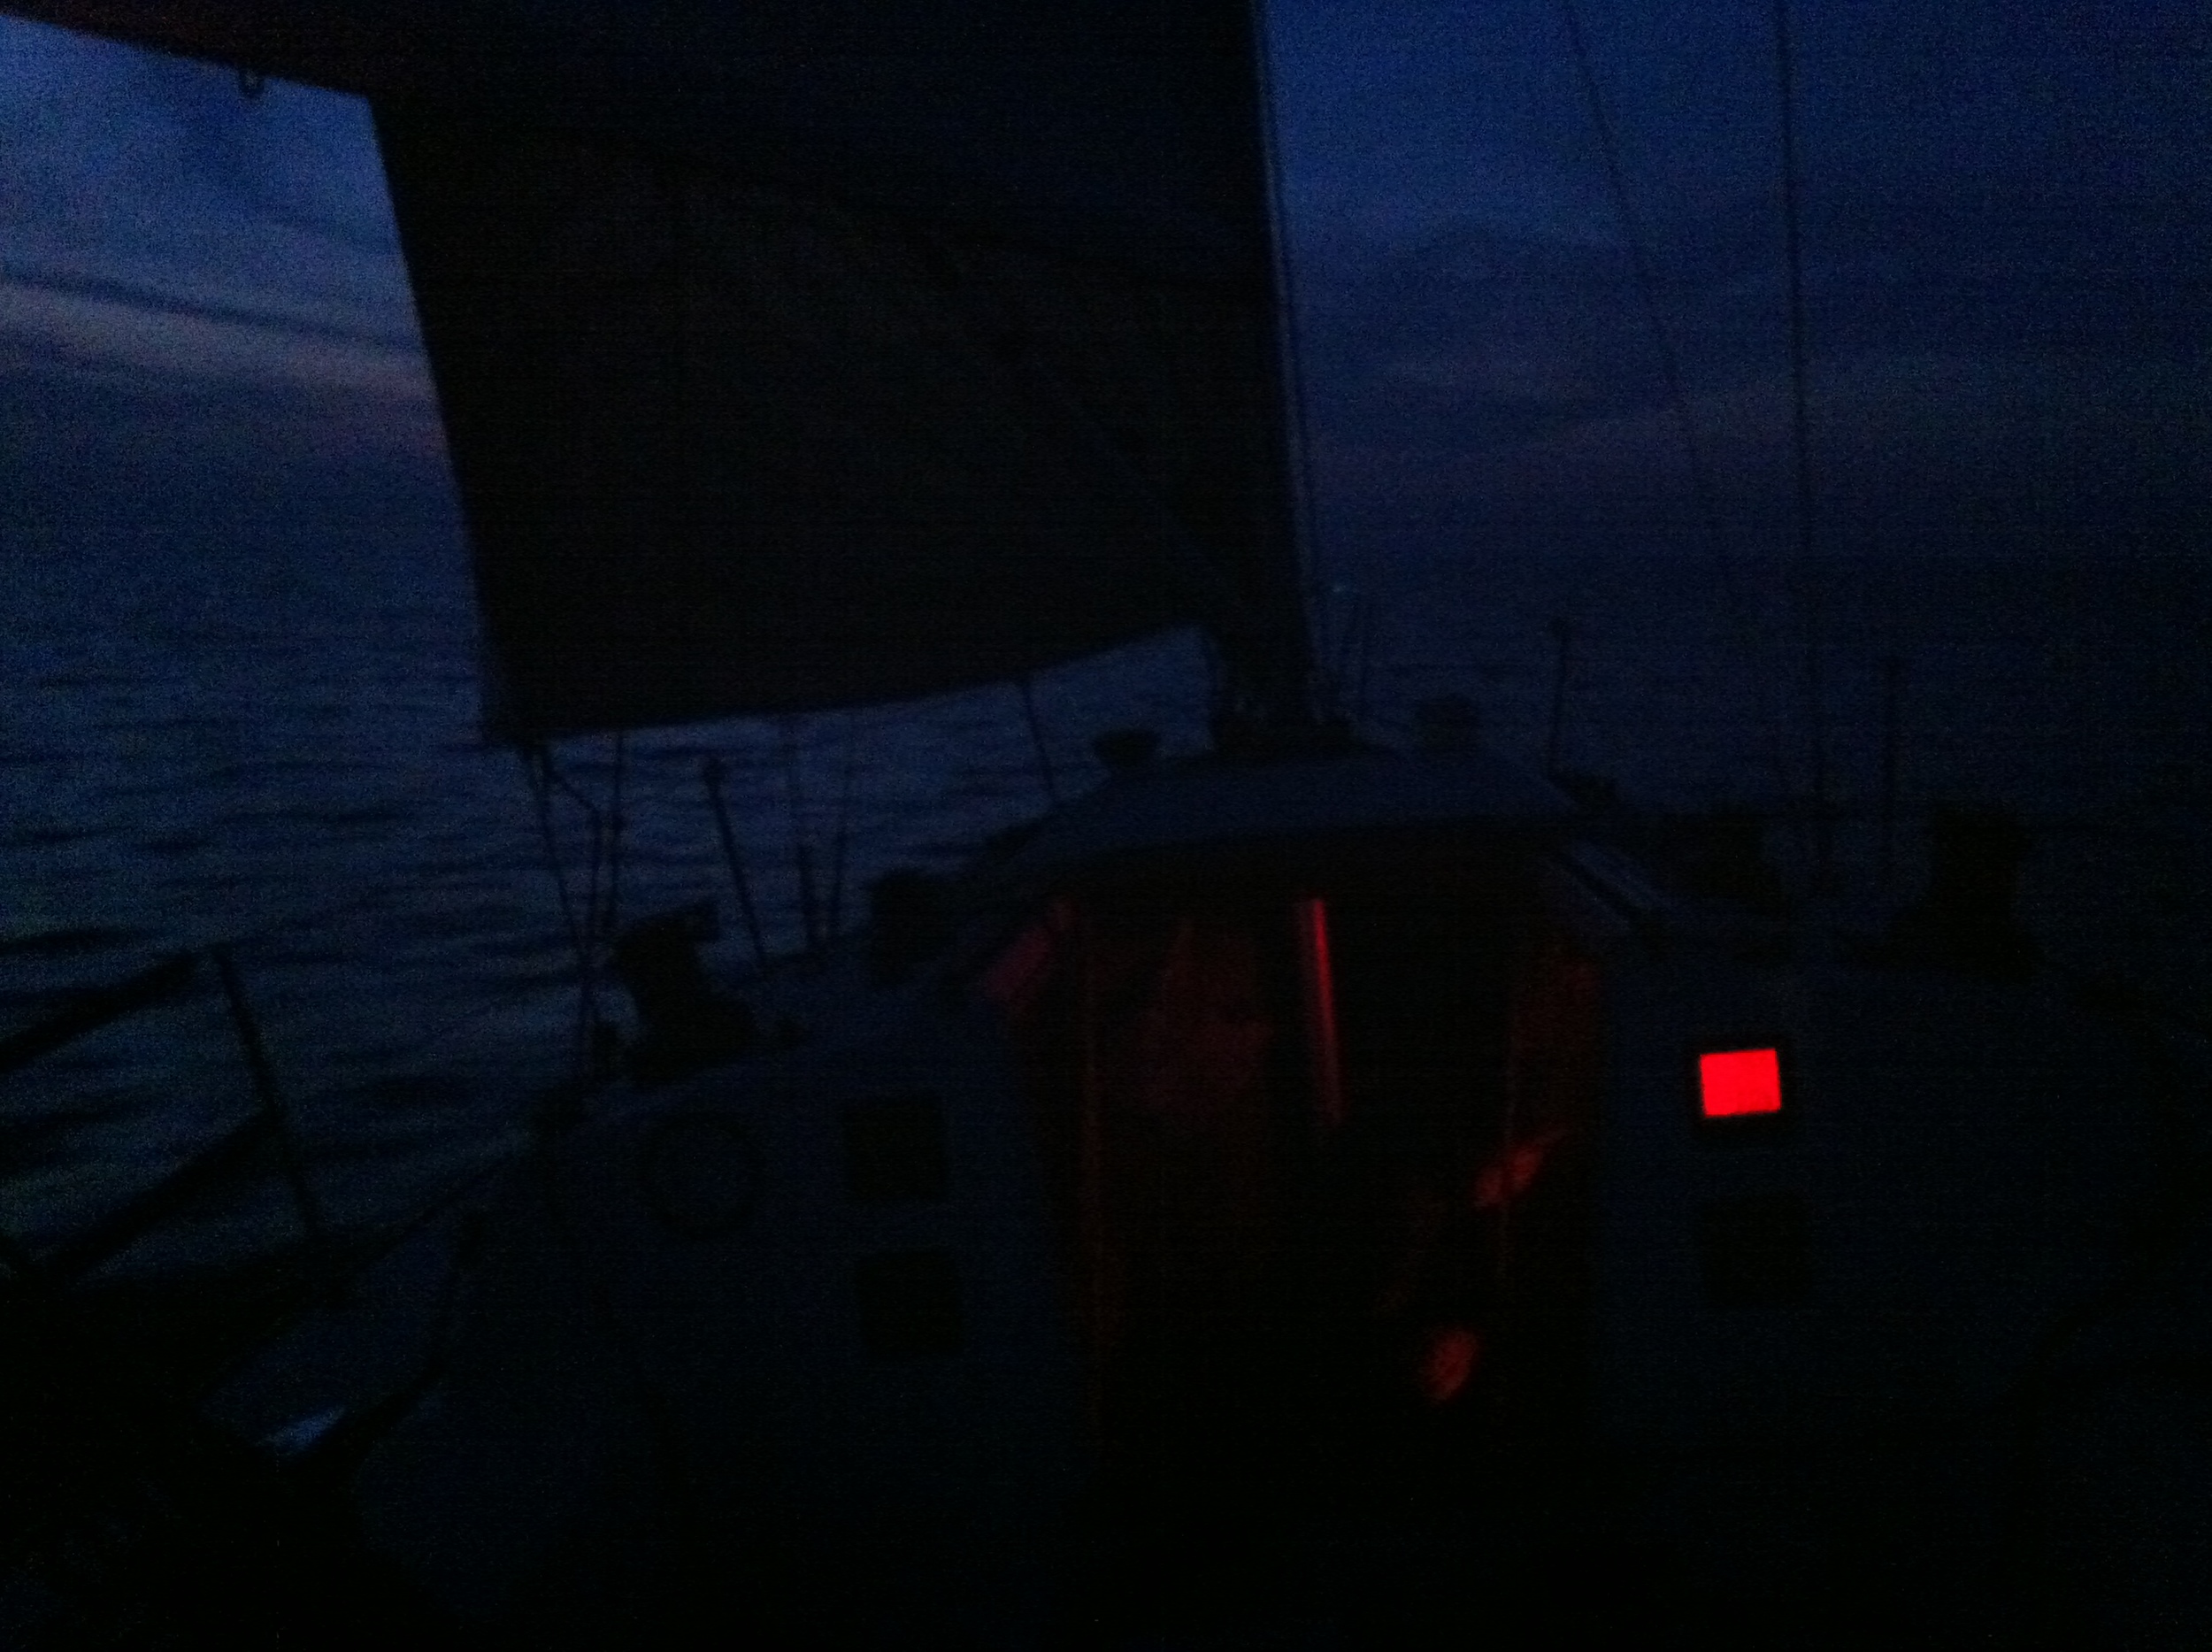 Friday night - 10 kts on the can